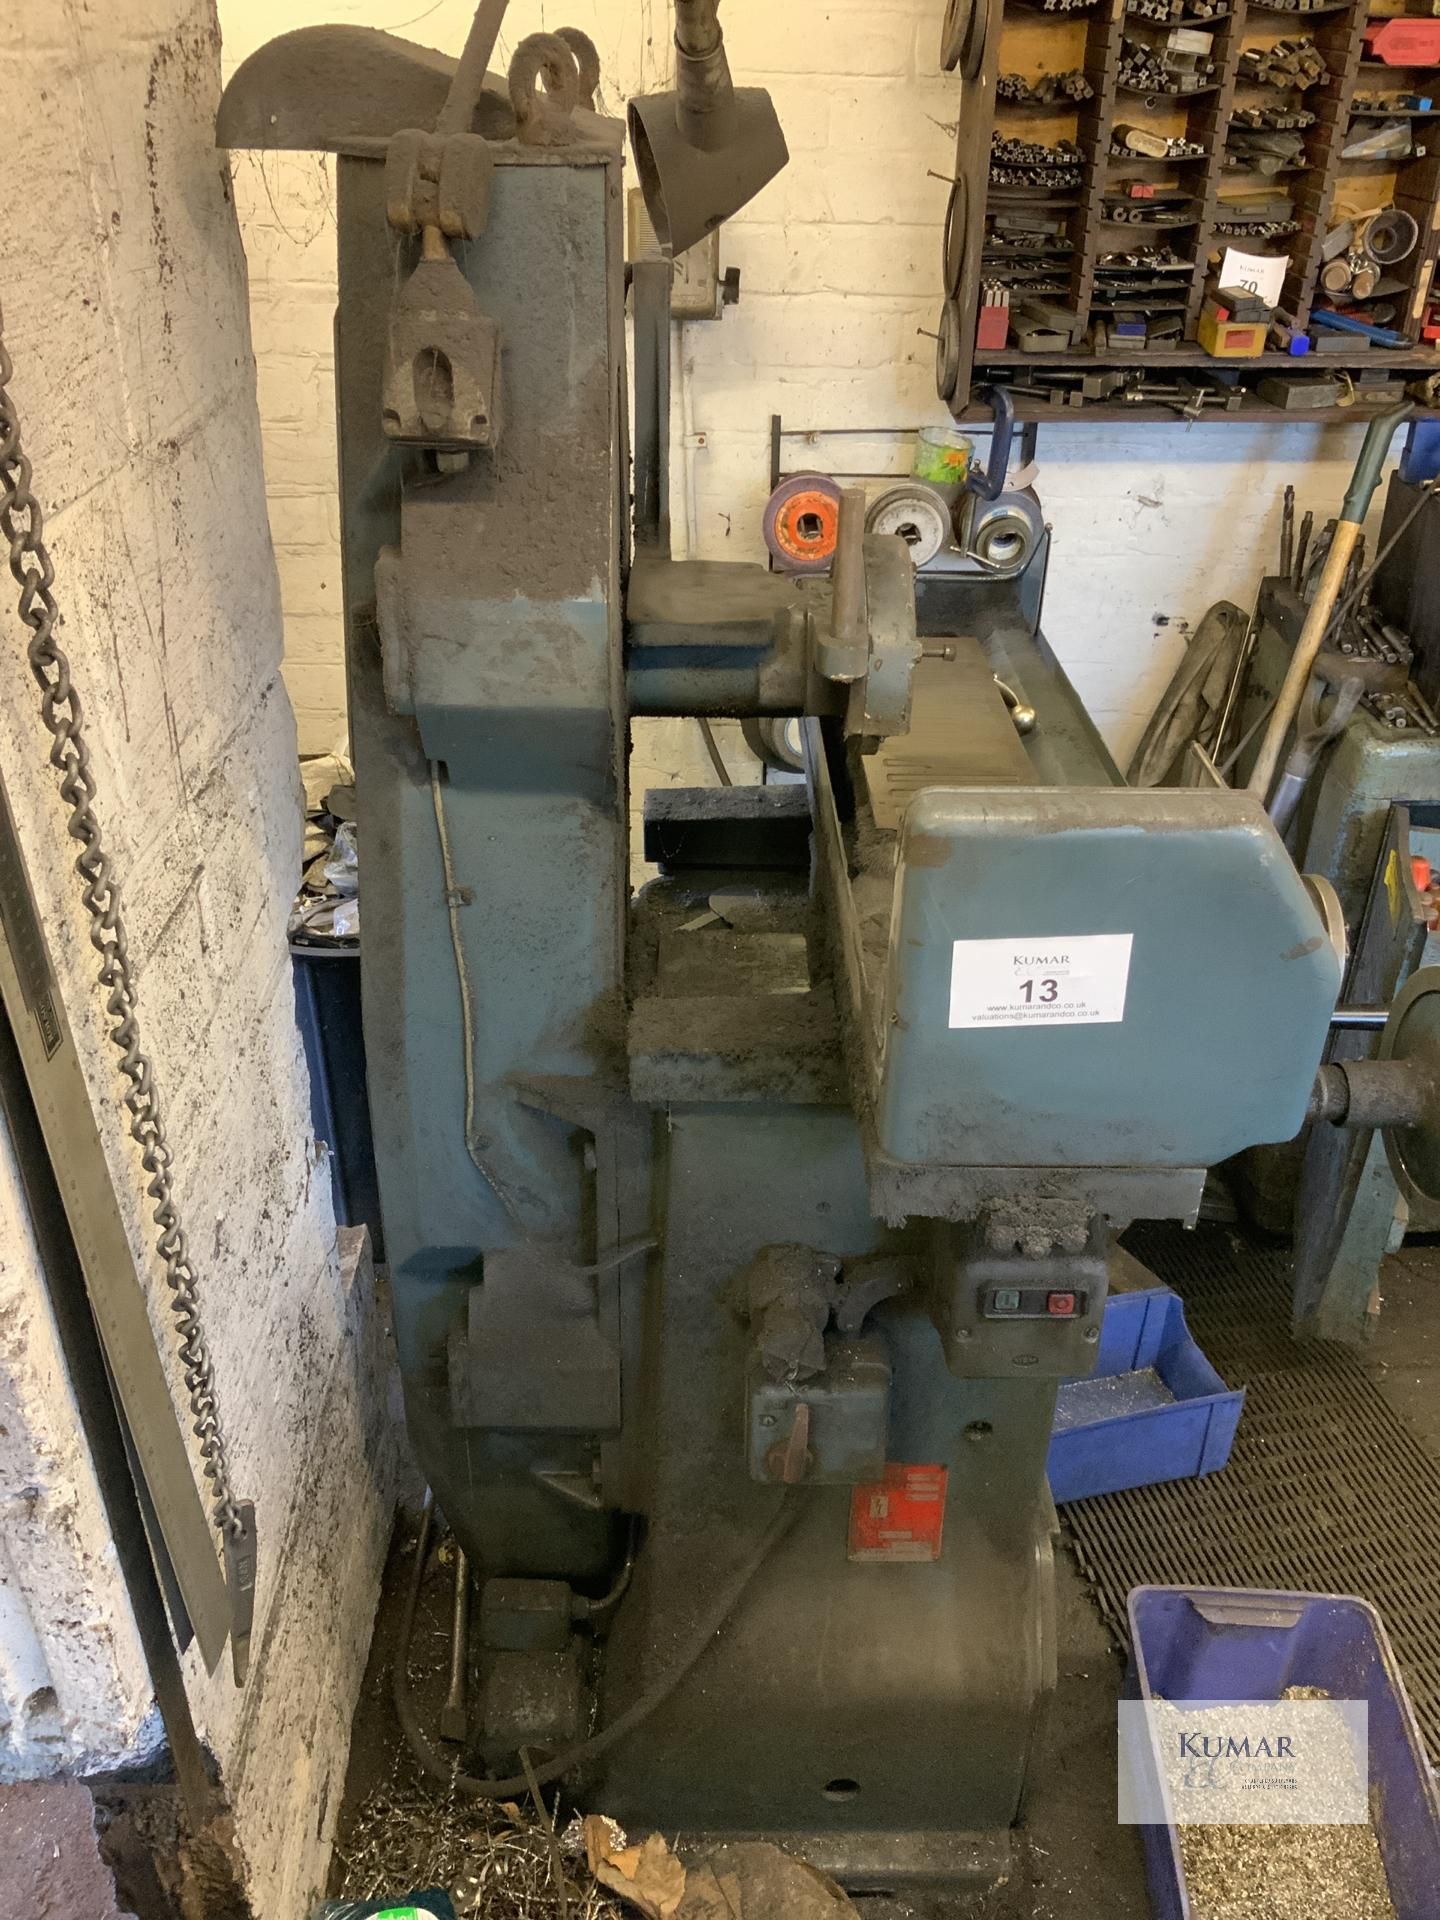 Jones & Shipman 540 Surface Grinder with Magnetic Chuck. Serial No. 1822/114 A £75 + VAT Lift Out - Image 6 of 7